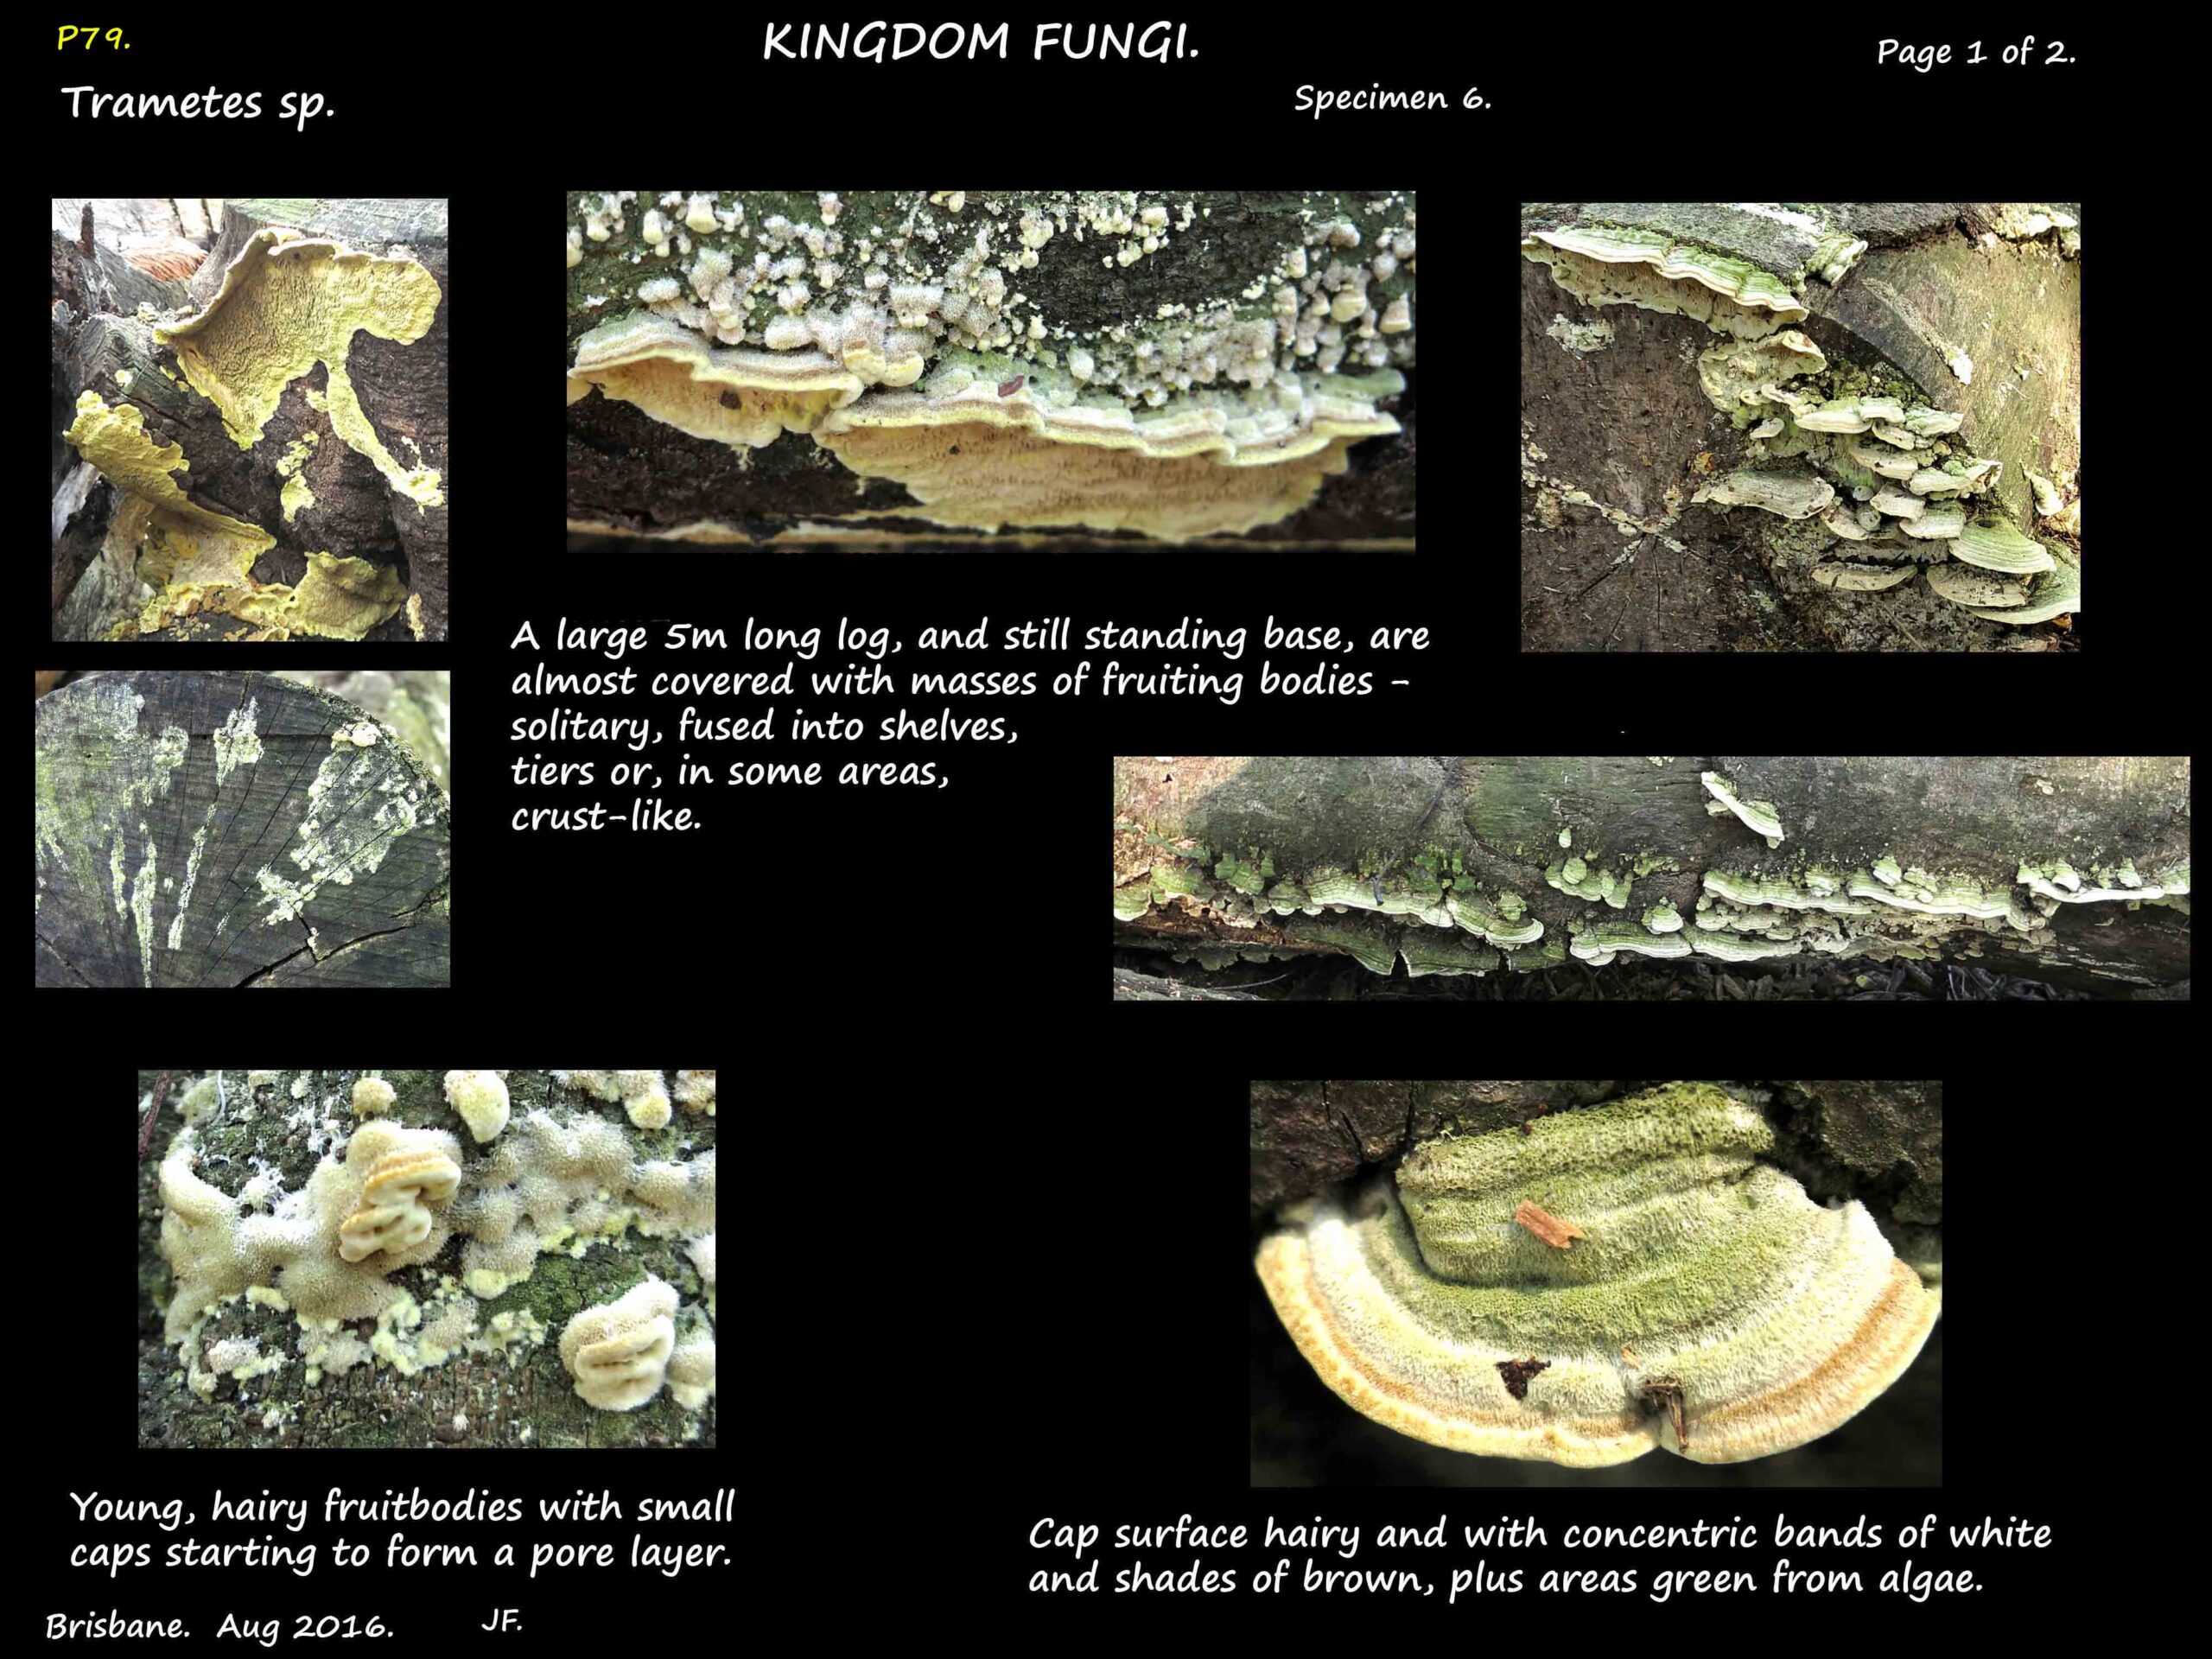 7a Solitary, tiered and crust-like Trametes on all surfaces of a log